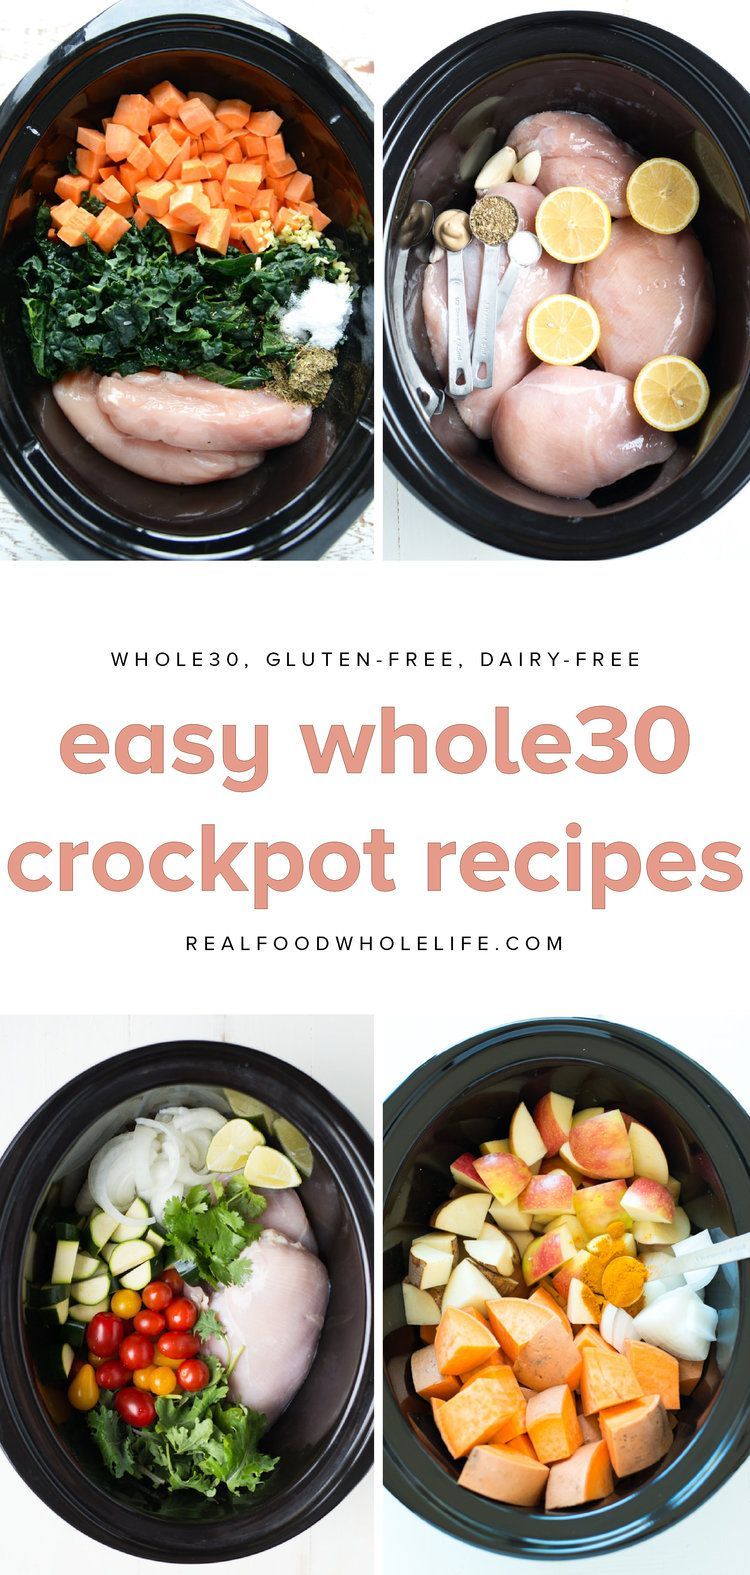 23 Easy Whole30 Crockpot Recipes to Throw in Your Slow Cooker -   17 healthy recipes Clean easy ideas